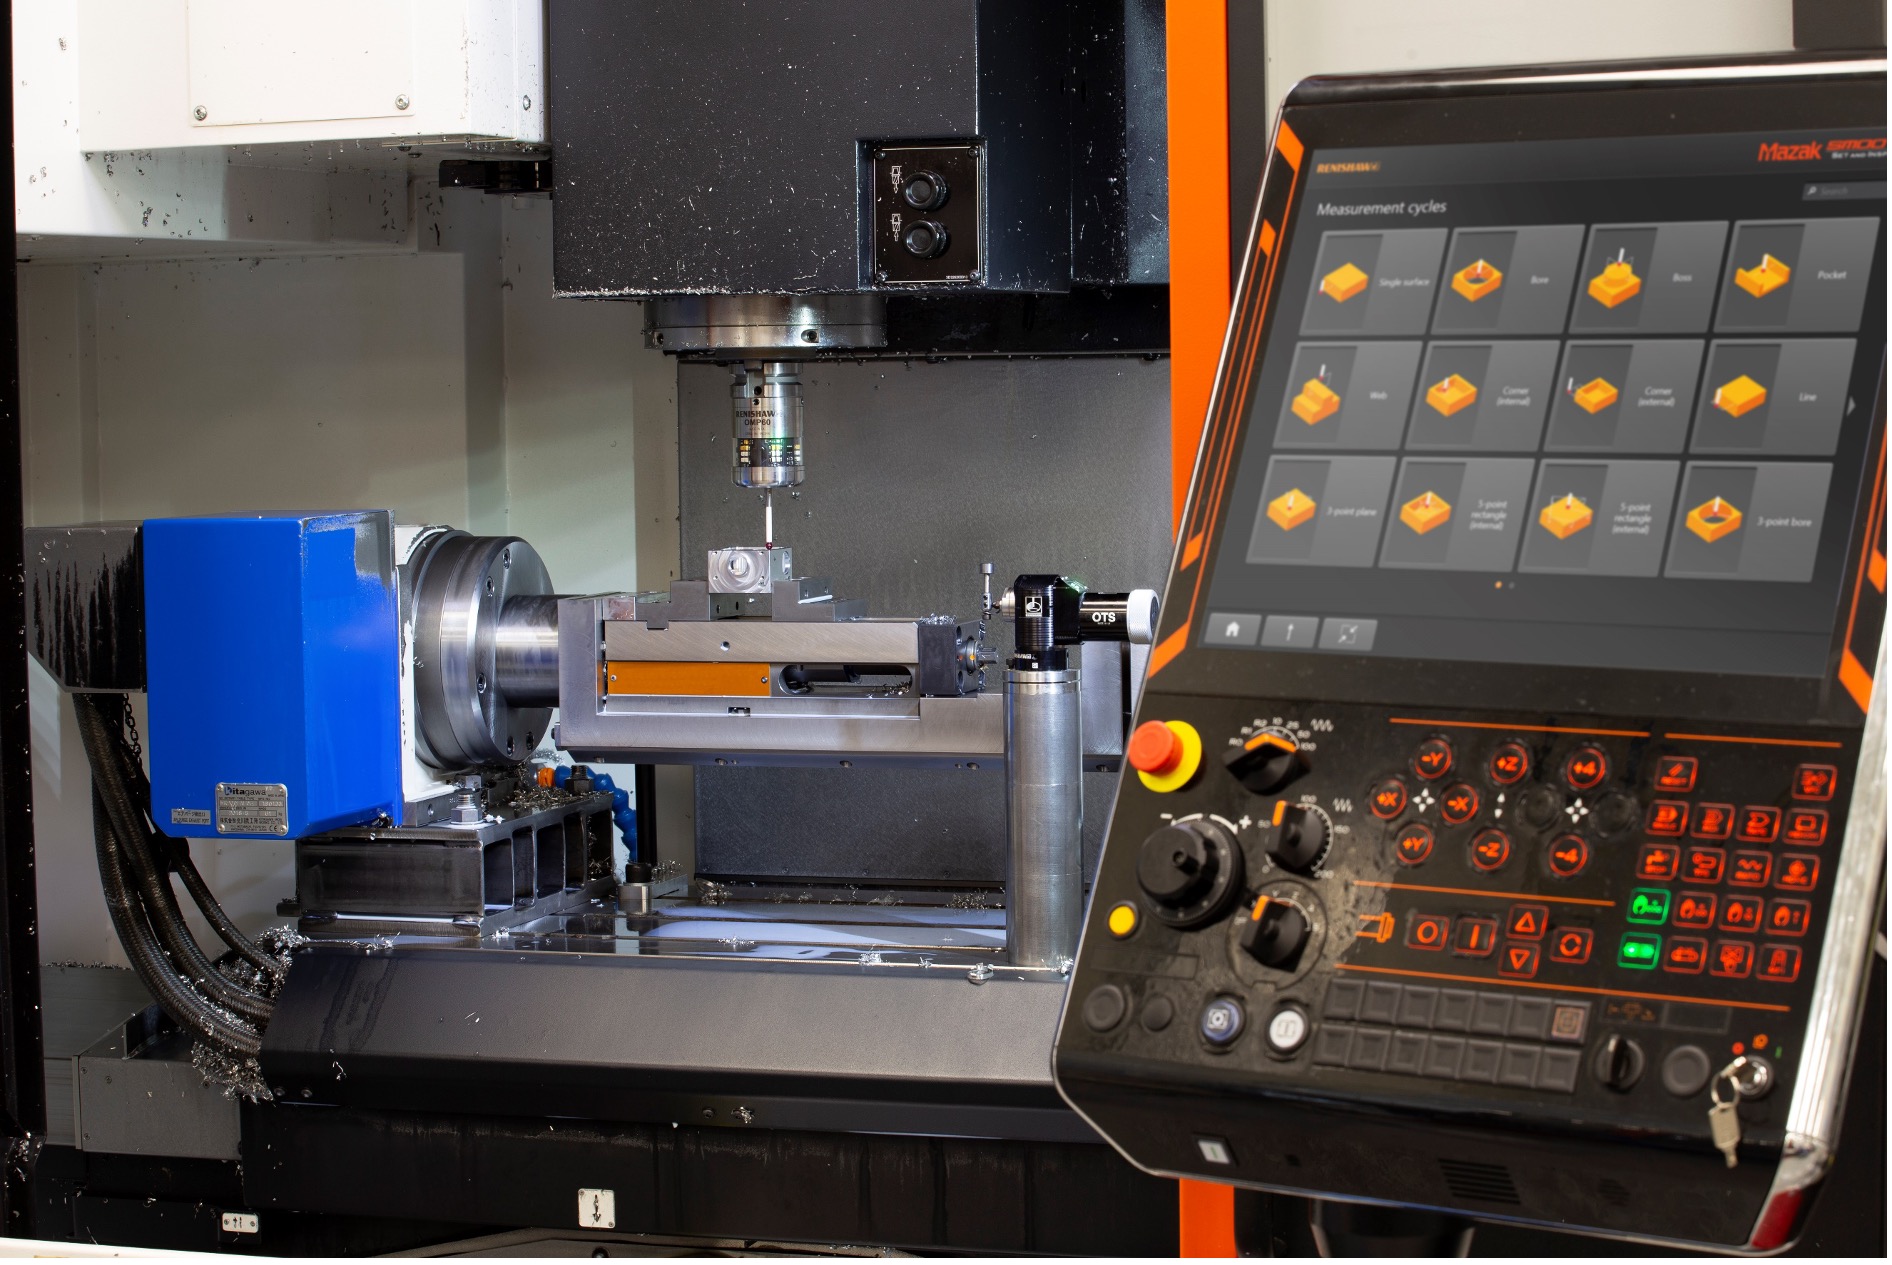 Software can support in-process machine probing functions, leading to operational efficiencies. (Image courtesy of Renishaw)